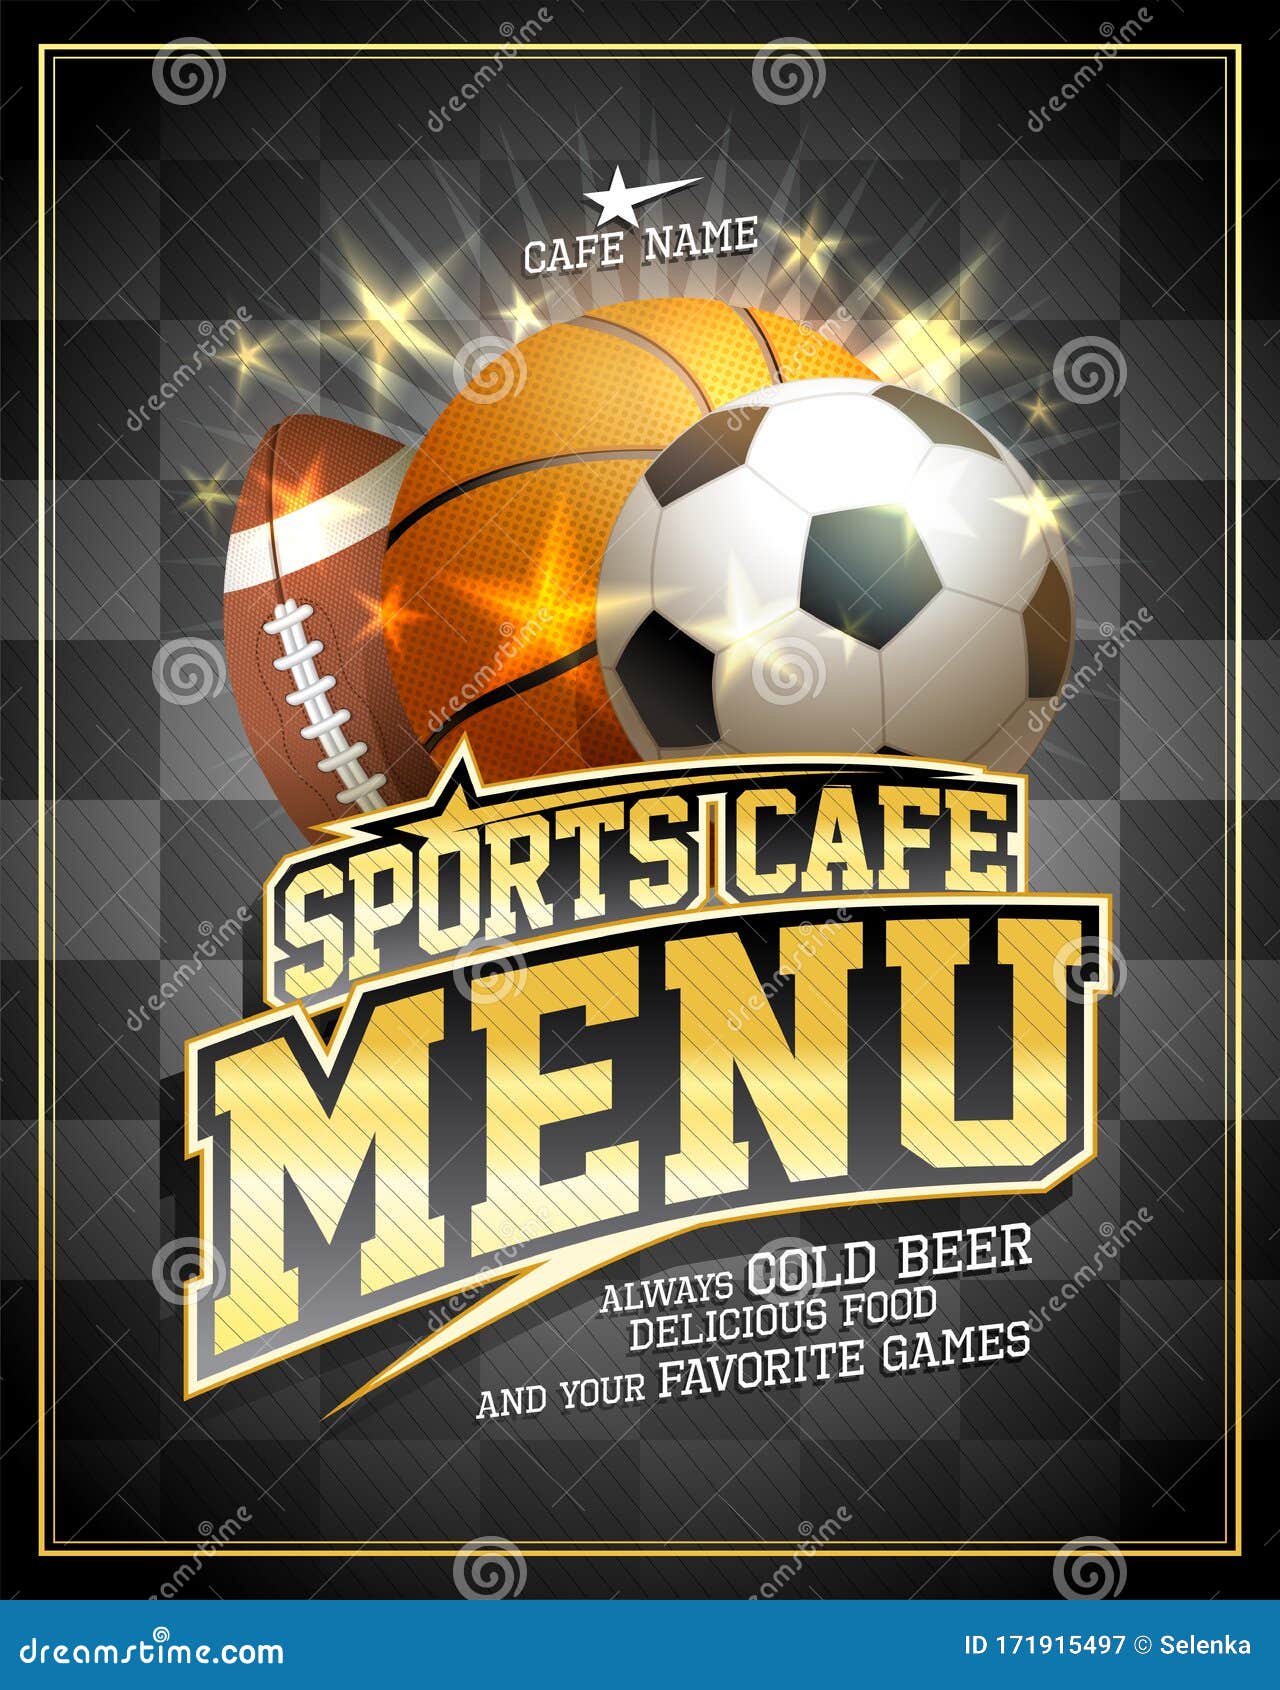 Sports Cafe Menu Card Design Template With Football Basketball And